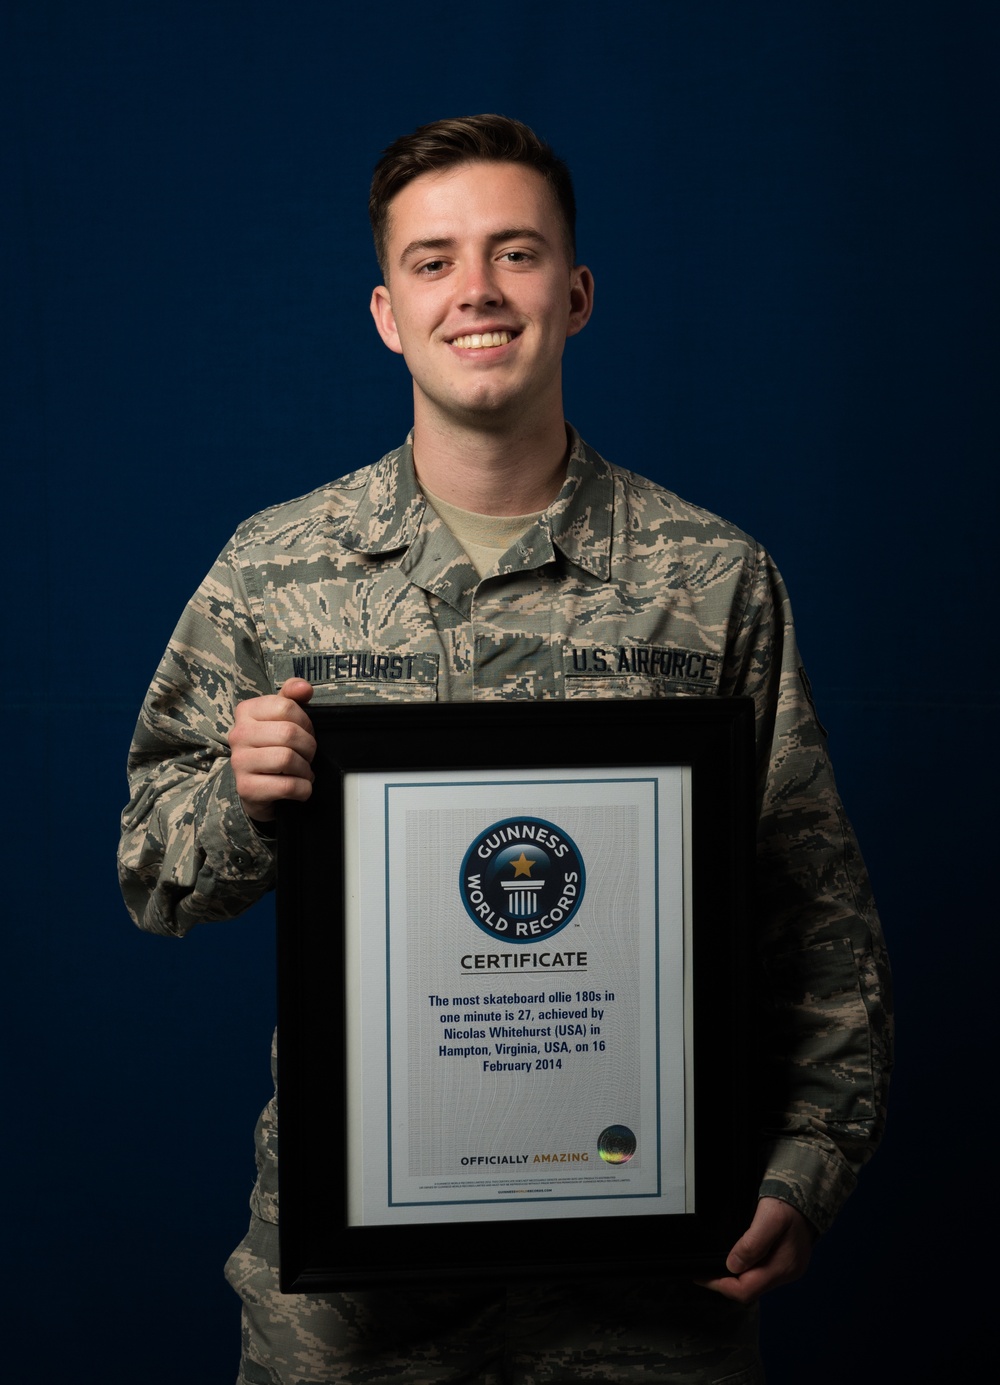 World record holder's skateboarding values carry into Air Force